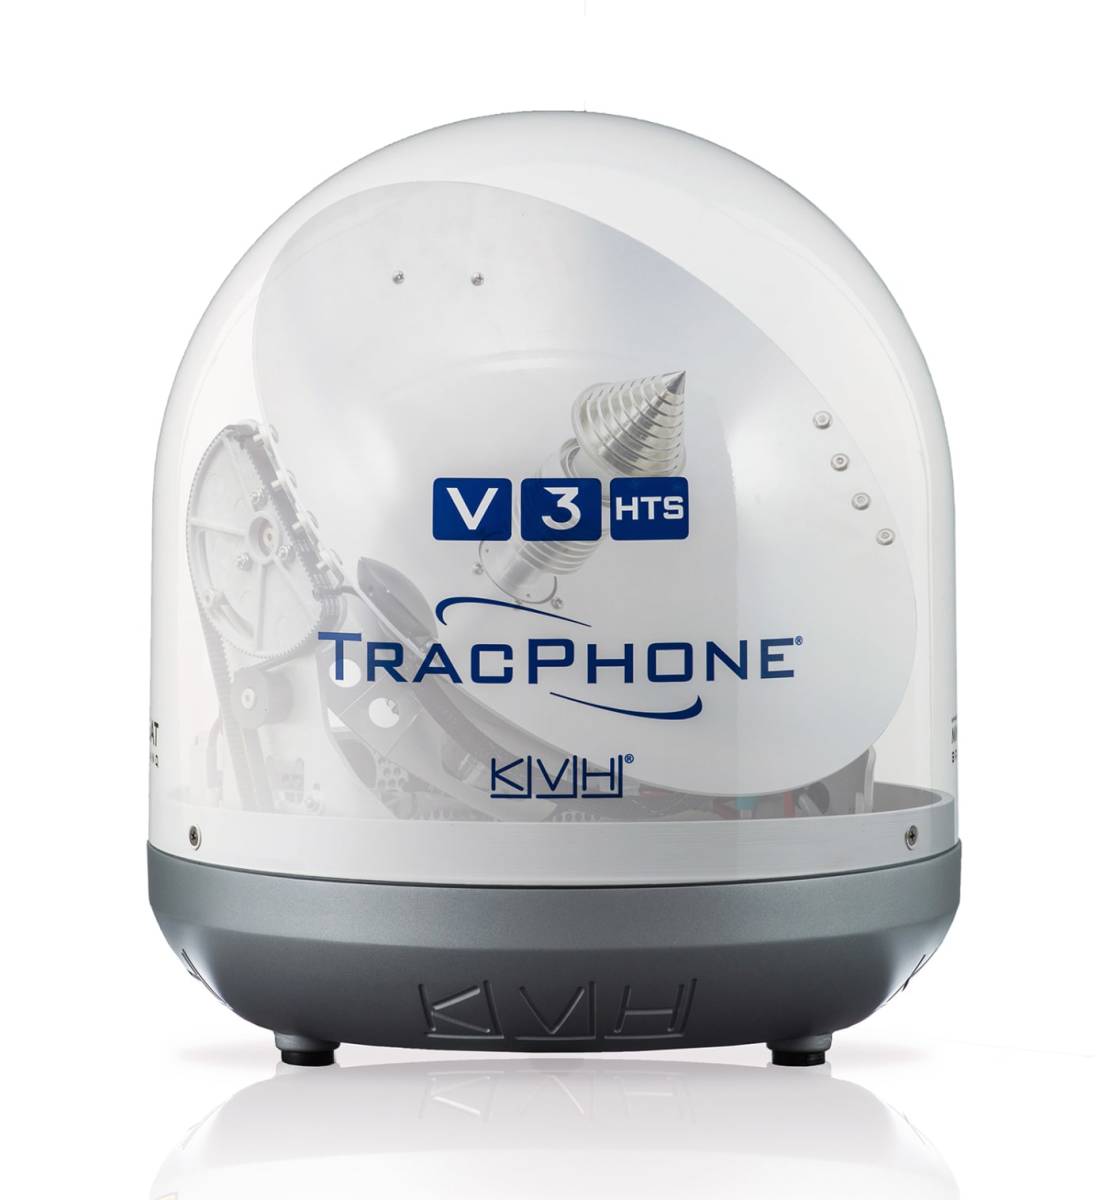 The TracPhone V3-HTS SATCOM antenna from KVH, because bigger isn’t always better.